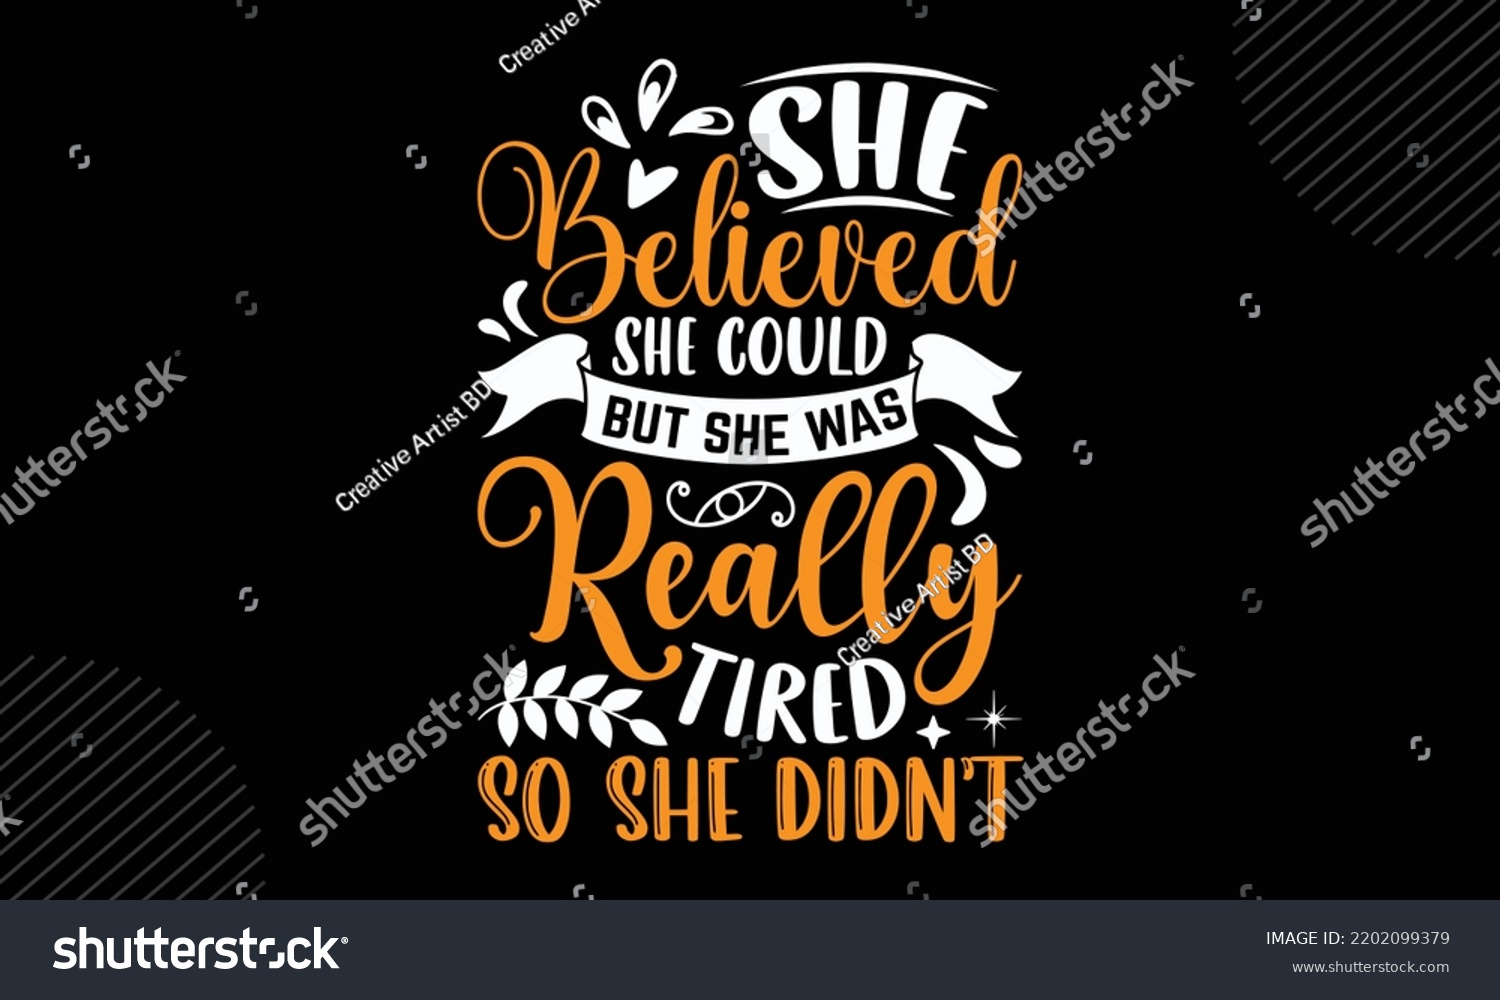 SVG of She Believed She Could But She Was Really Tired So She Didn’t - Mom T shirt Design, Modern calligraphy, Cut Files for Cricut Svg, Illustration for prints on bags, posters svg